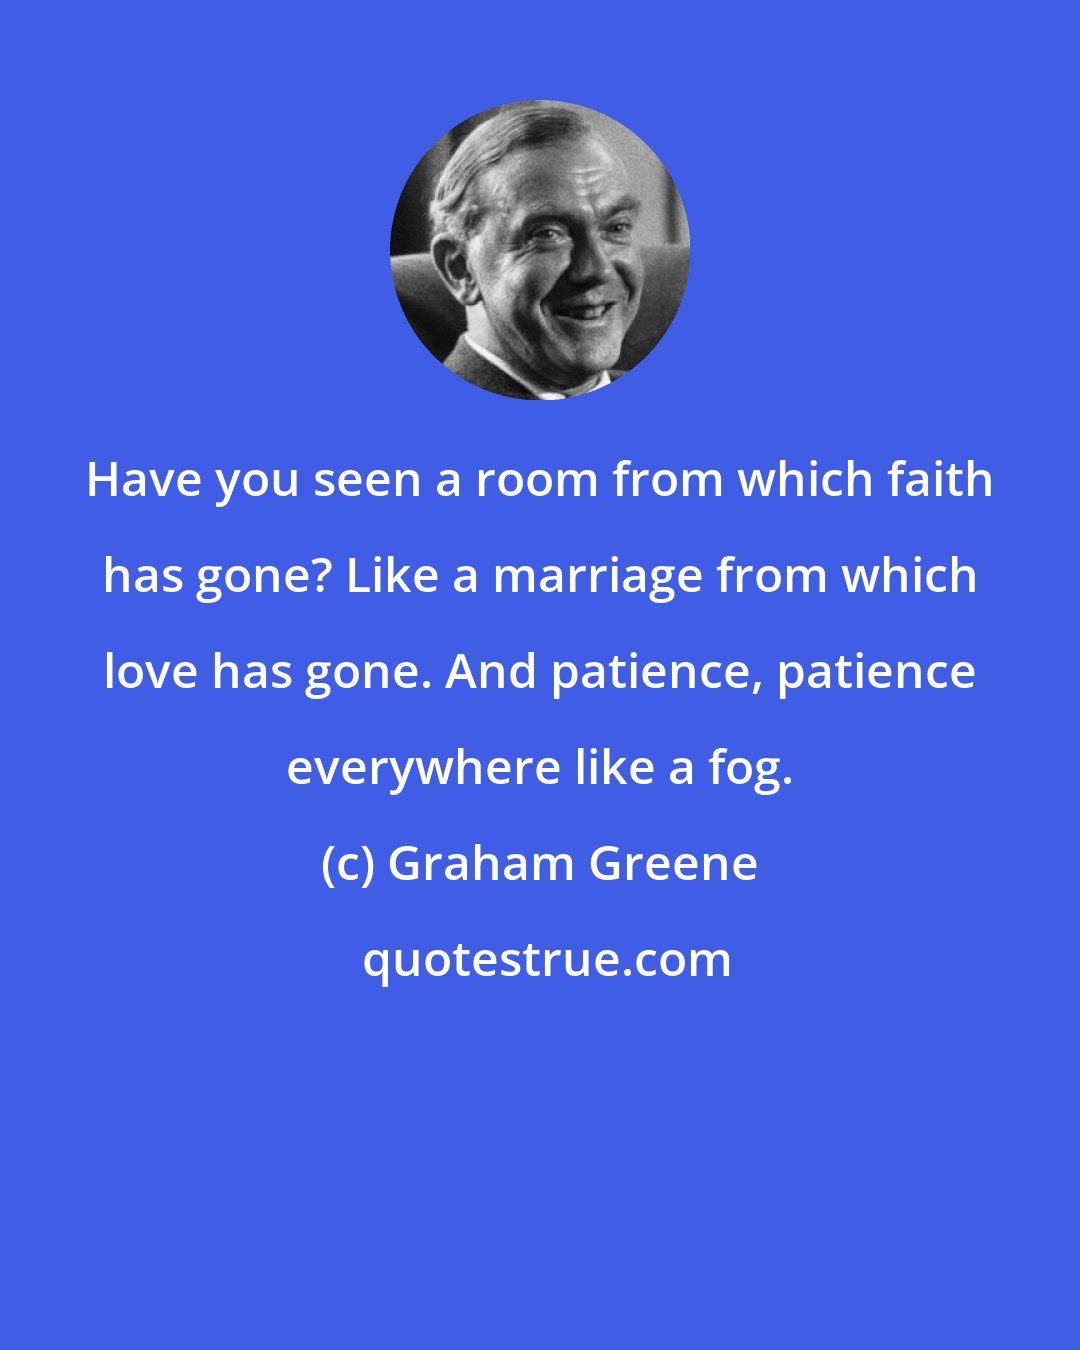 Graham Greene: Have you seen a room from which faith has gone? Like a marriage from which love has gone. And patience, patience everywhere like a fog.